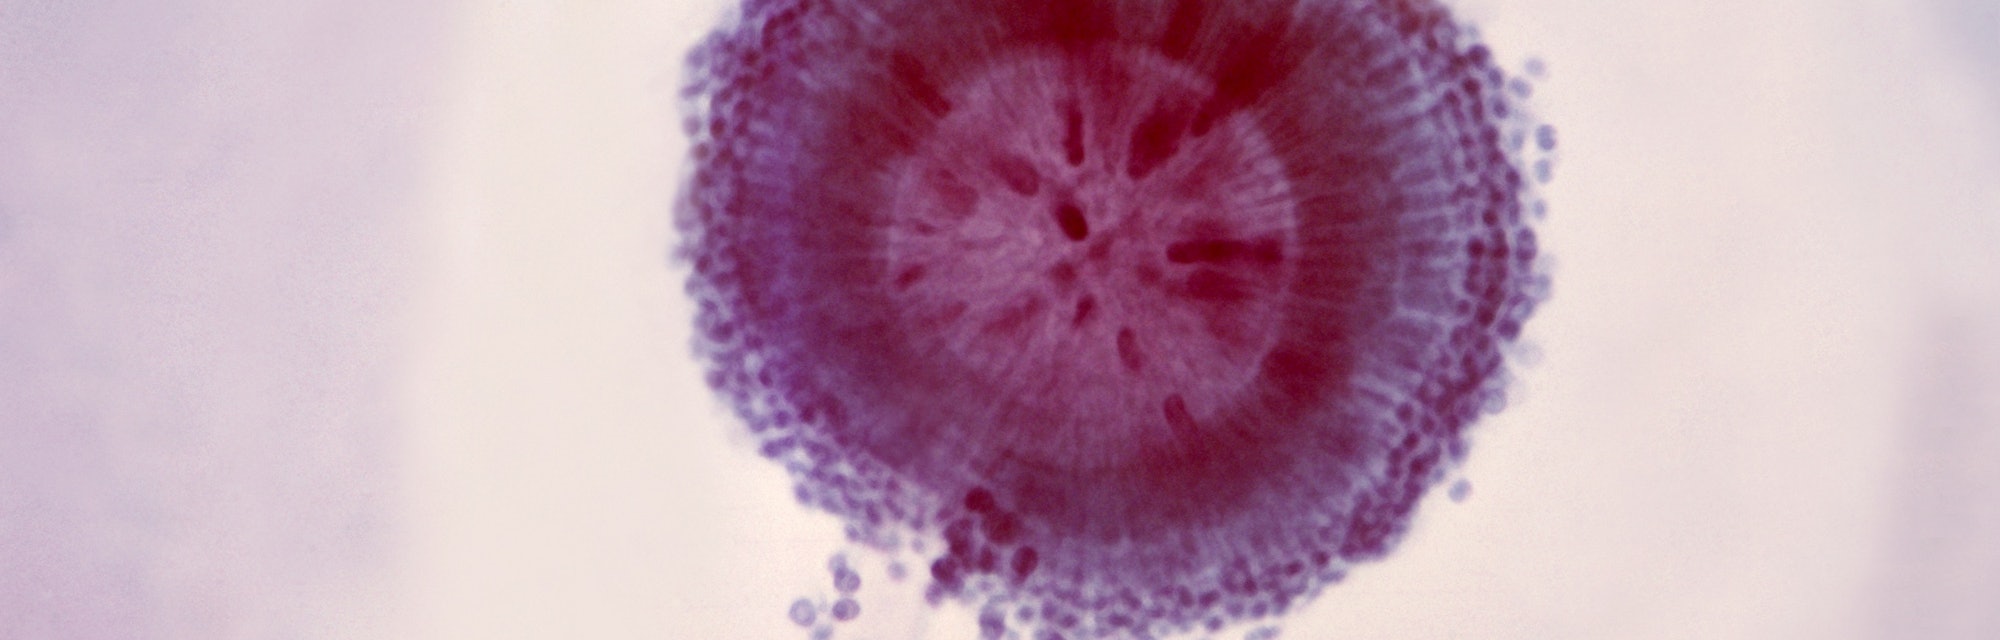 Photomicrograph of the conidial head of an Aspergillus niger fungus, showing a double row of sterigm...